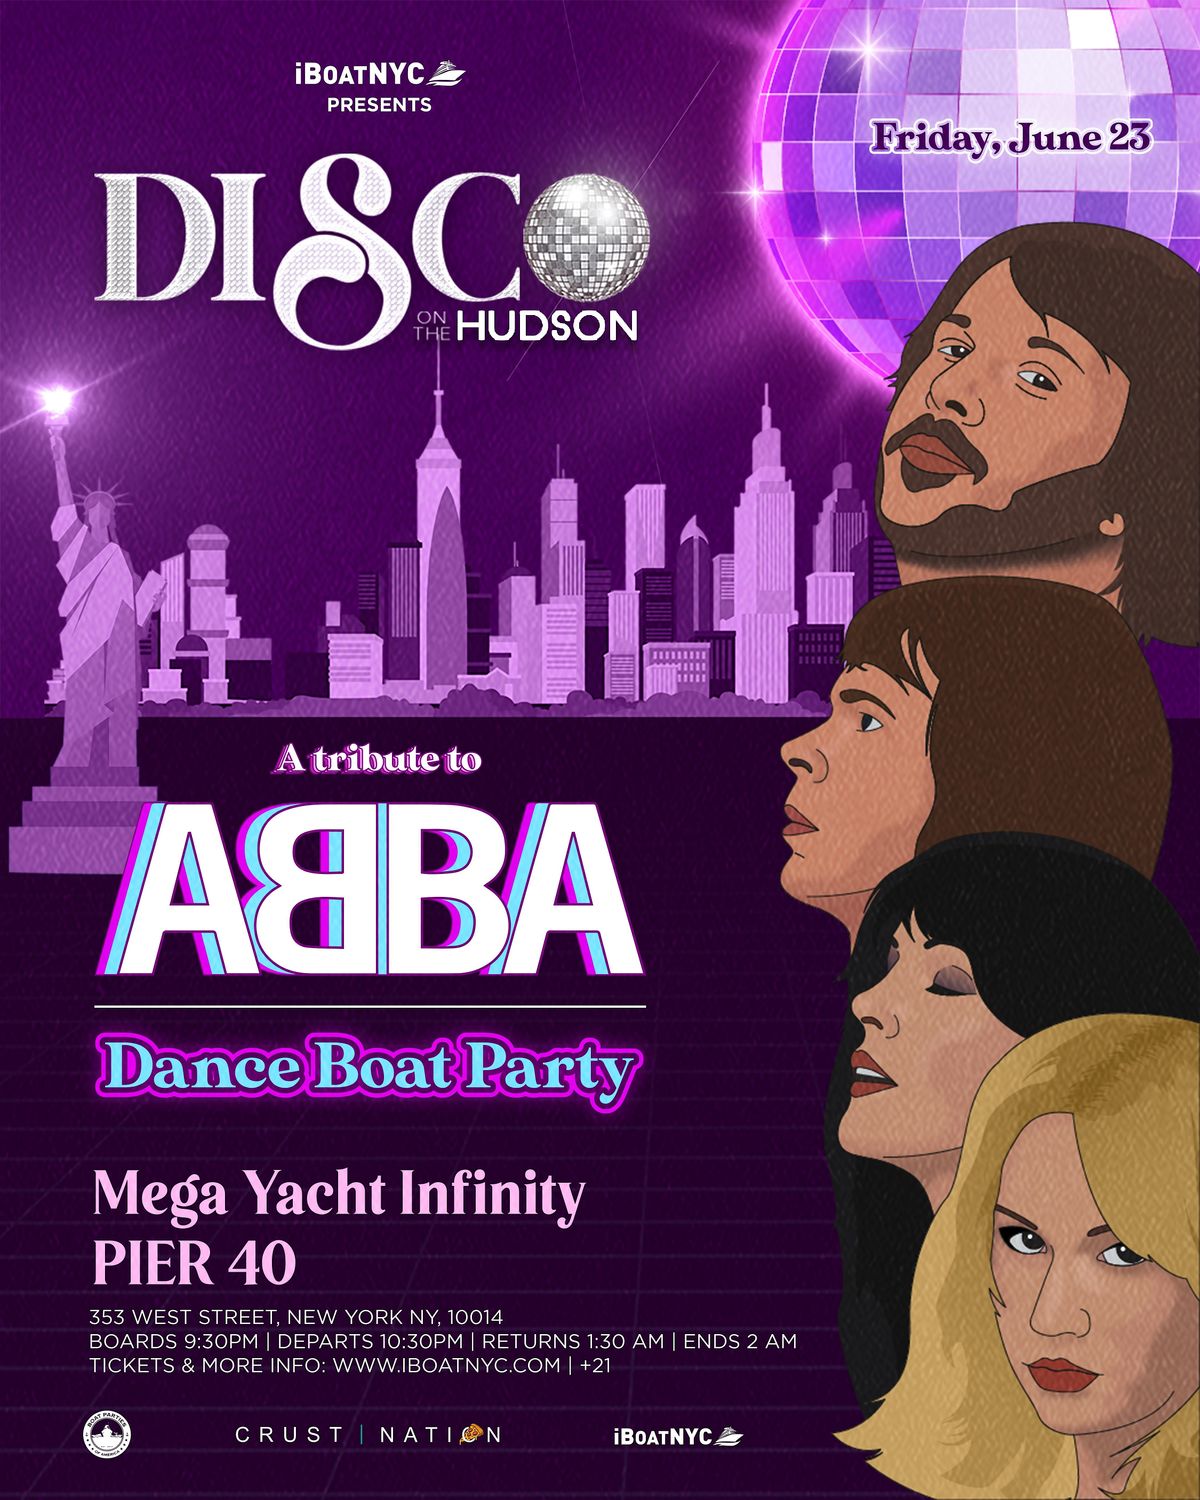 A Tribute to ABBA - DISCO on the HUDSON Boat Party